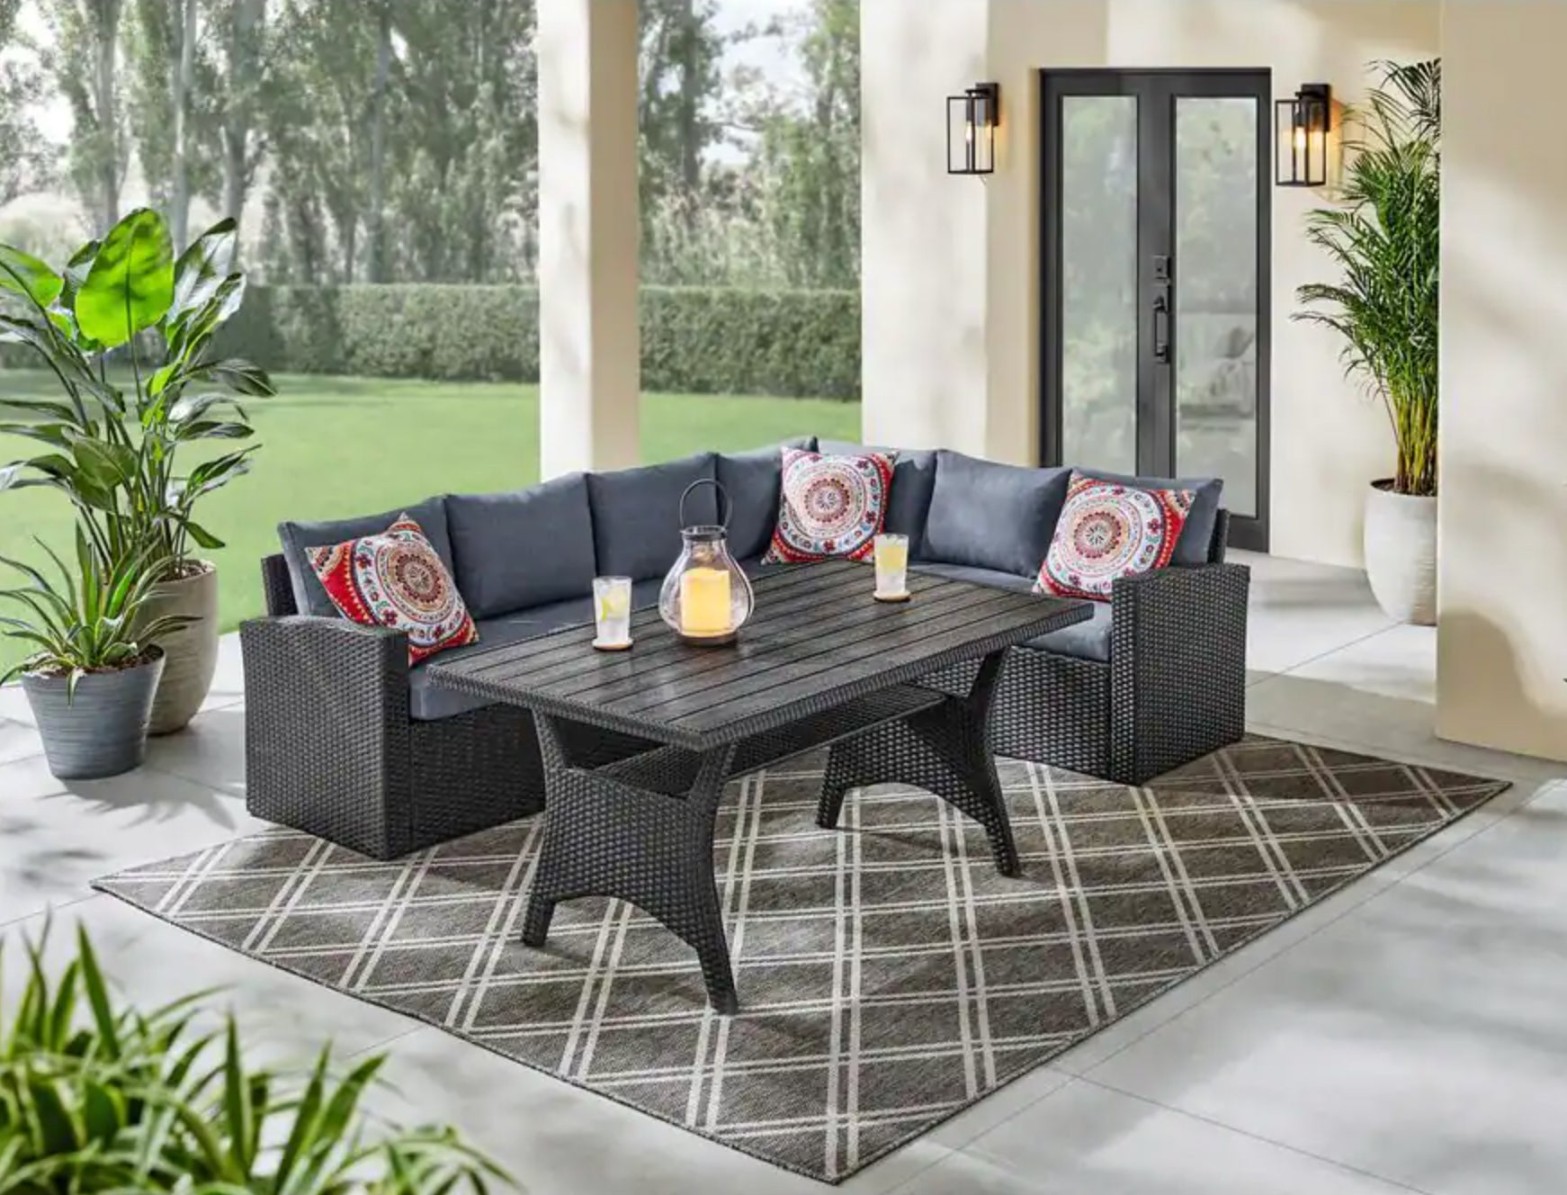 Home Depot Memorial Day: Save $, on a Patio Set + 5 More